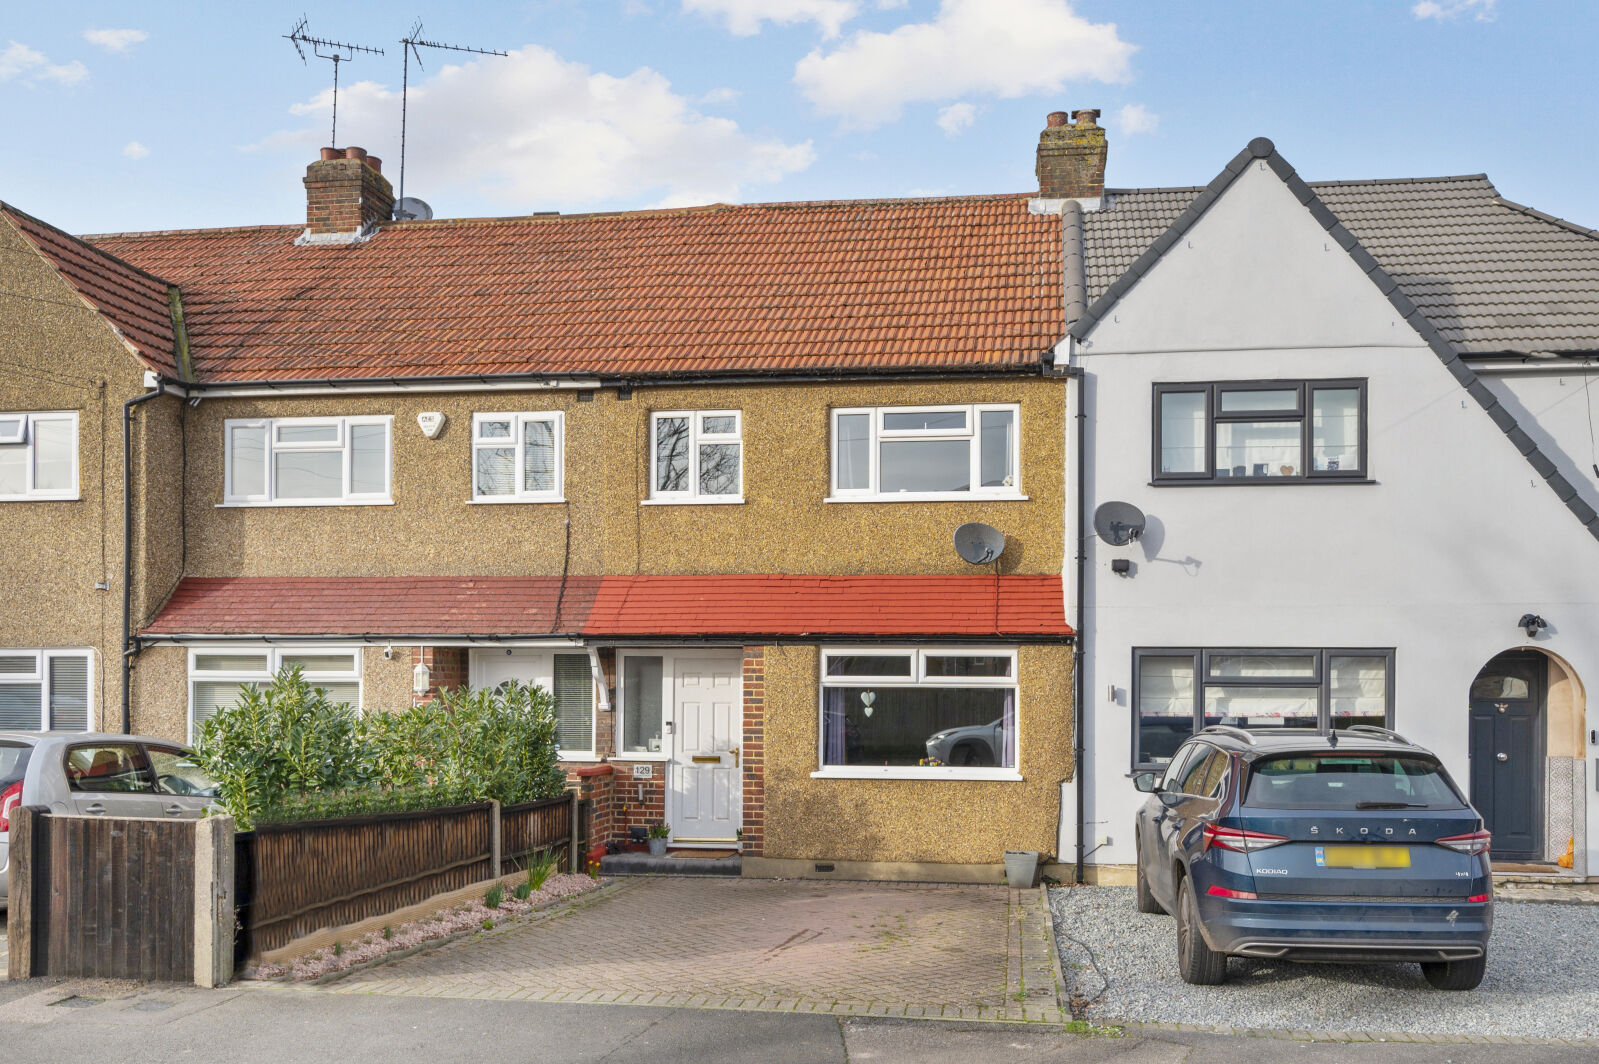 4 bedroom mid terraced house for sale Compton Crescent, Chessington, KT9, main image